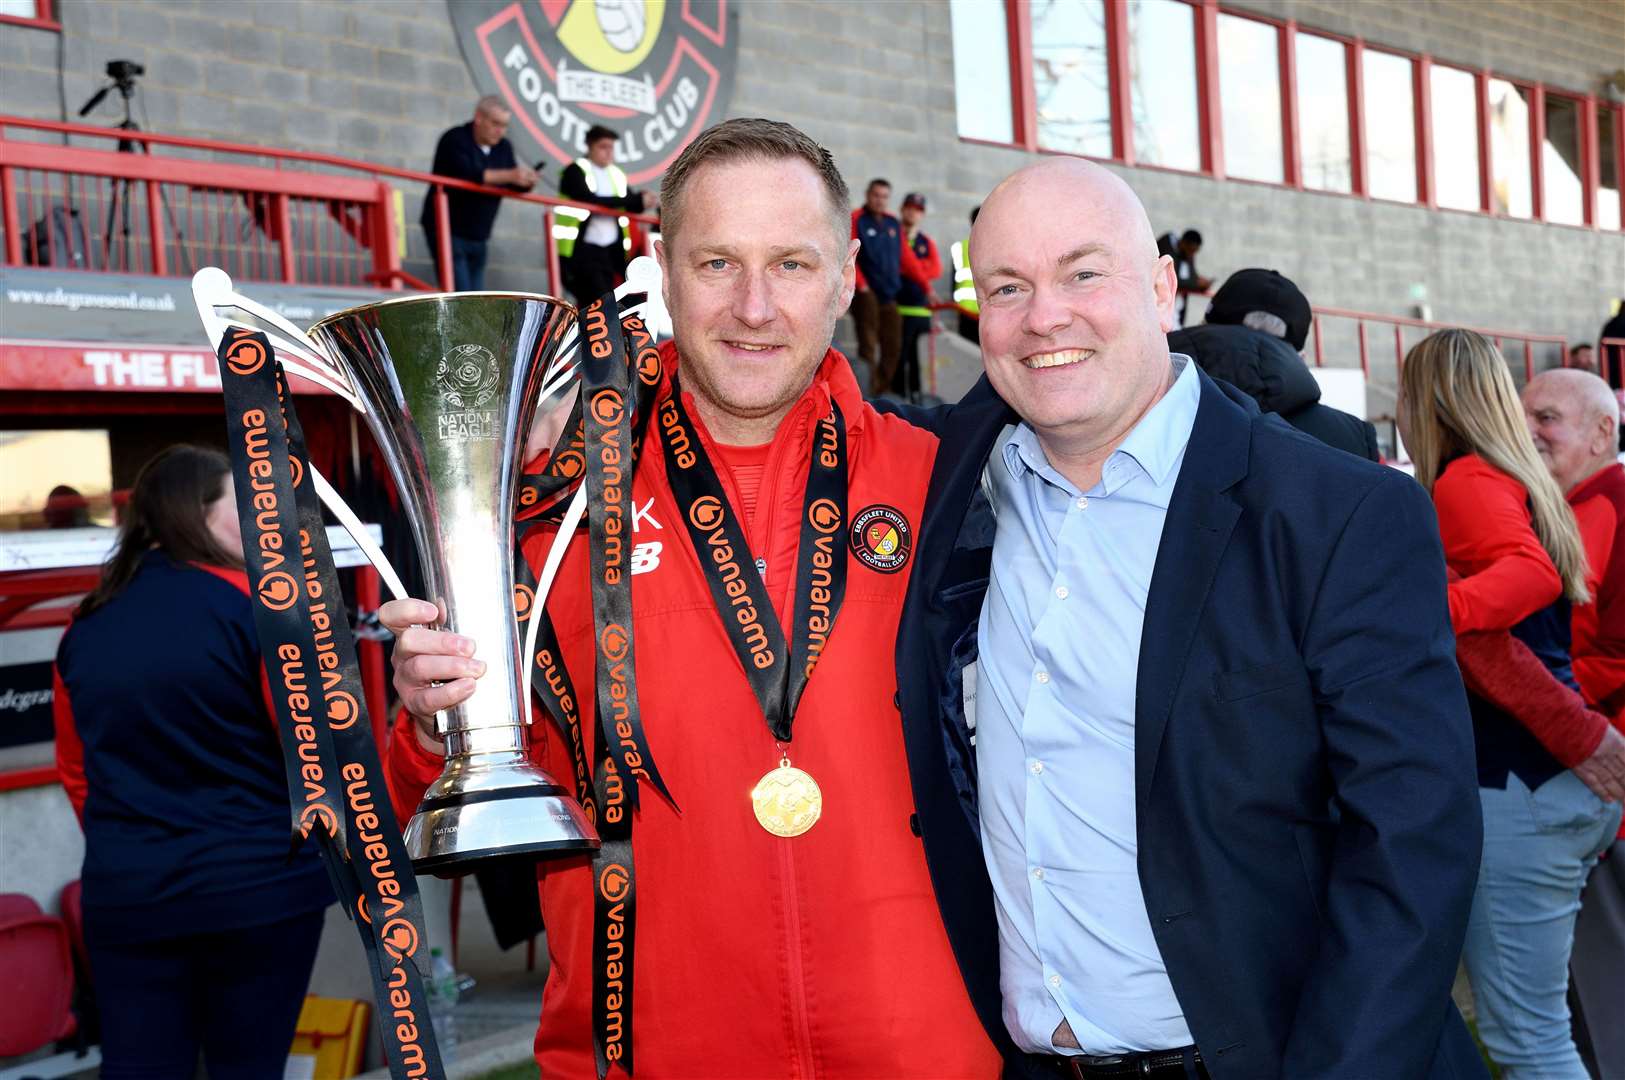 Ebbsfleet boss Dennis Kutrieb celebrates his side's 2022/23 National League South title win with chief executive Damian Irvine. PIcture: Simon Hildrew